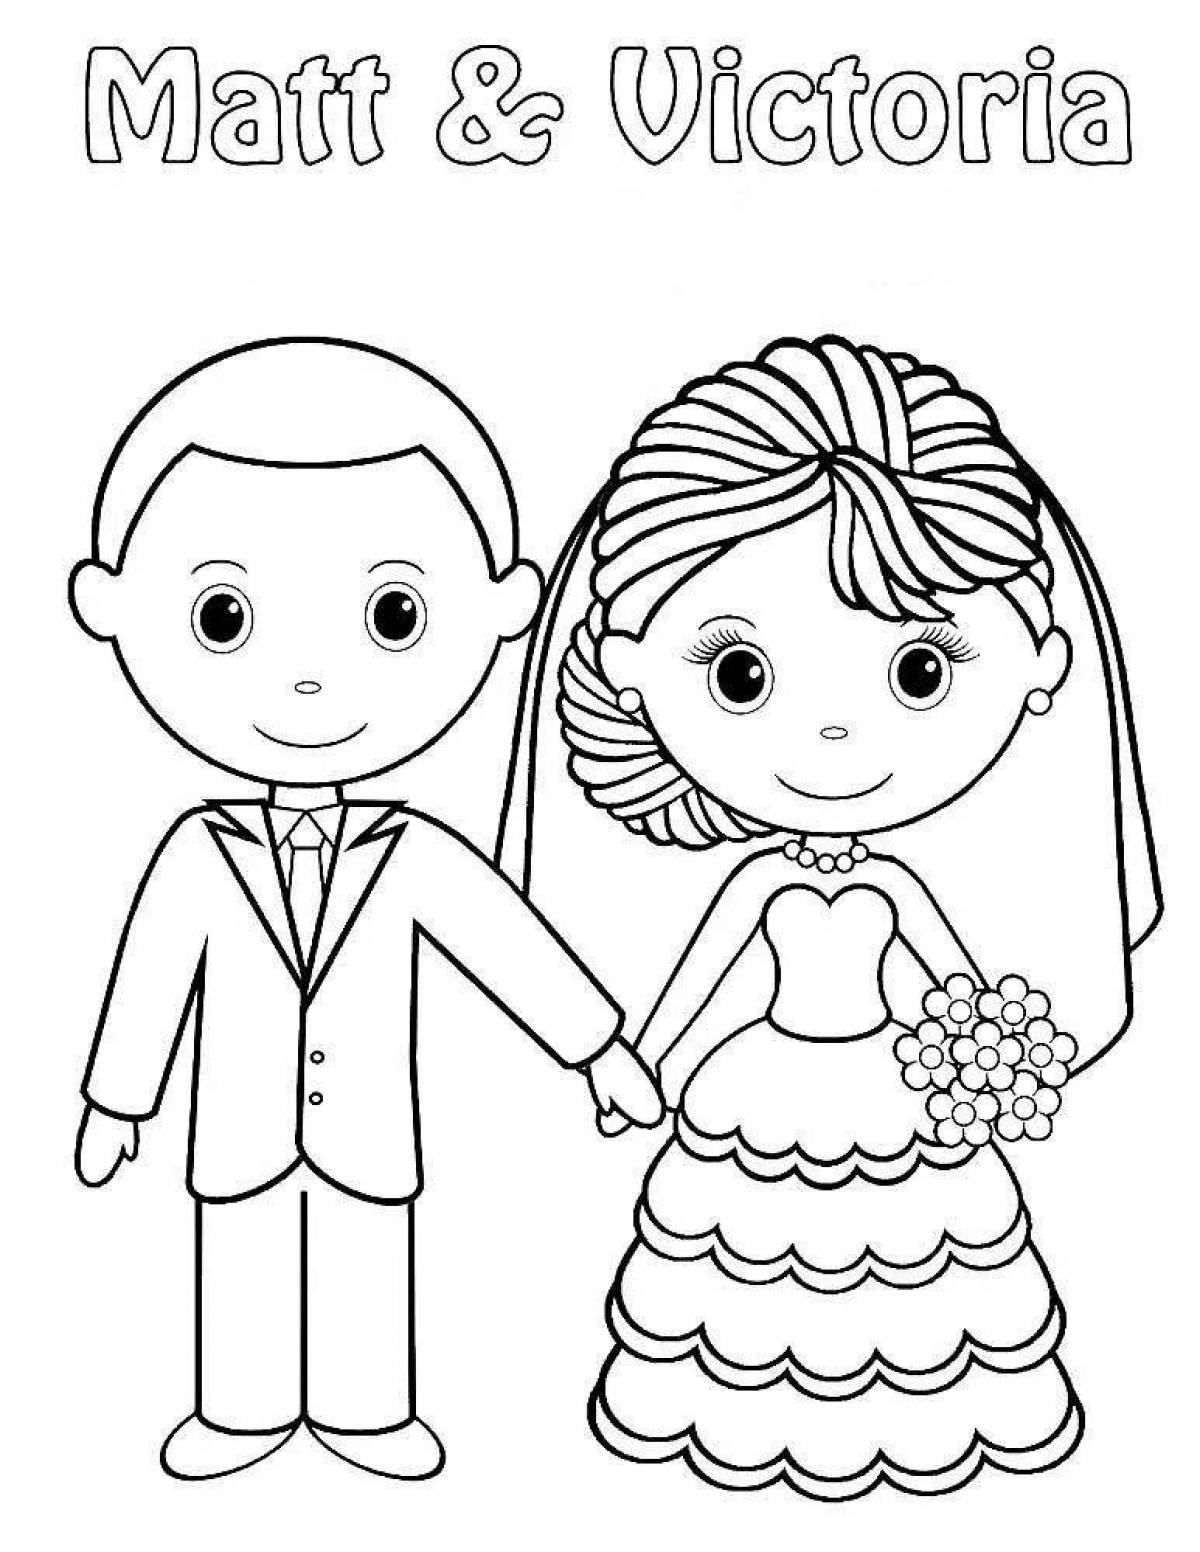 Coloring page cute wife and husband